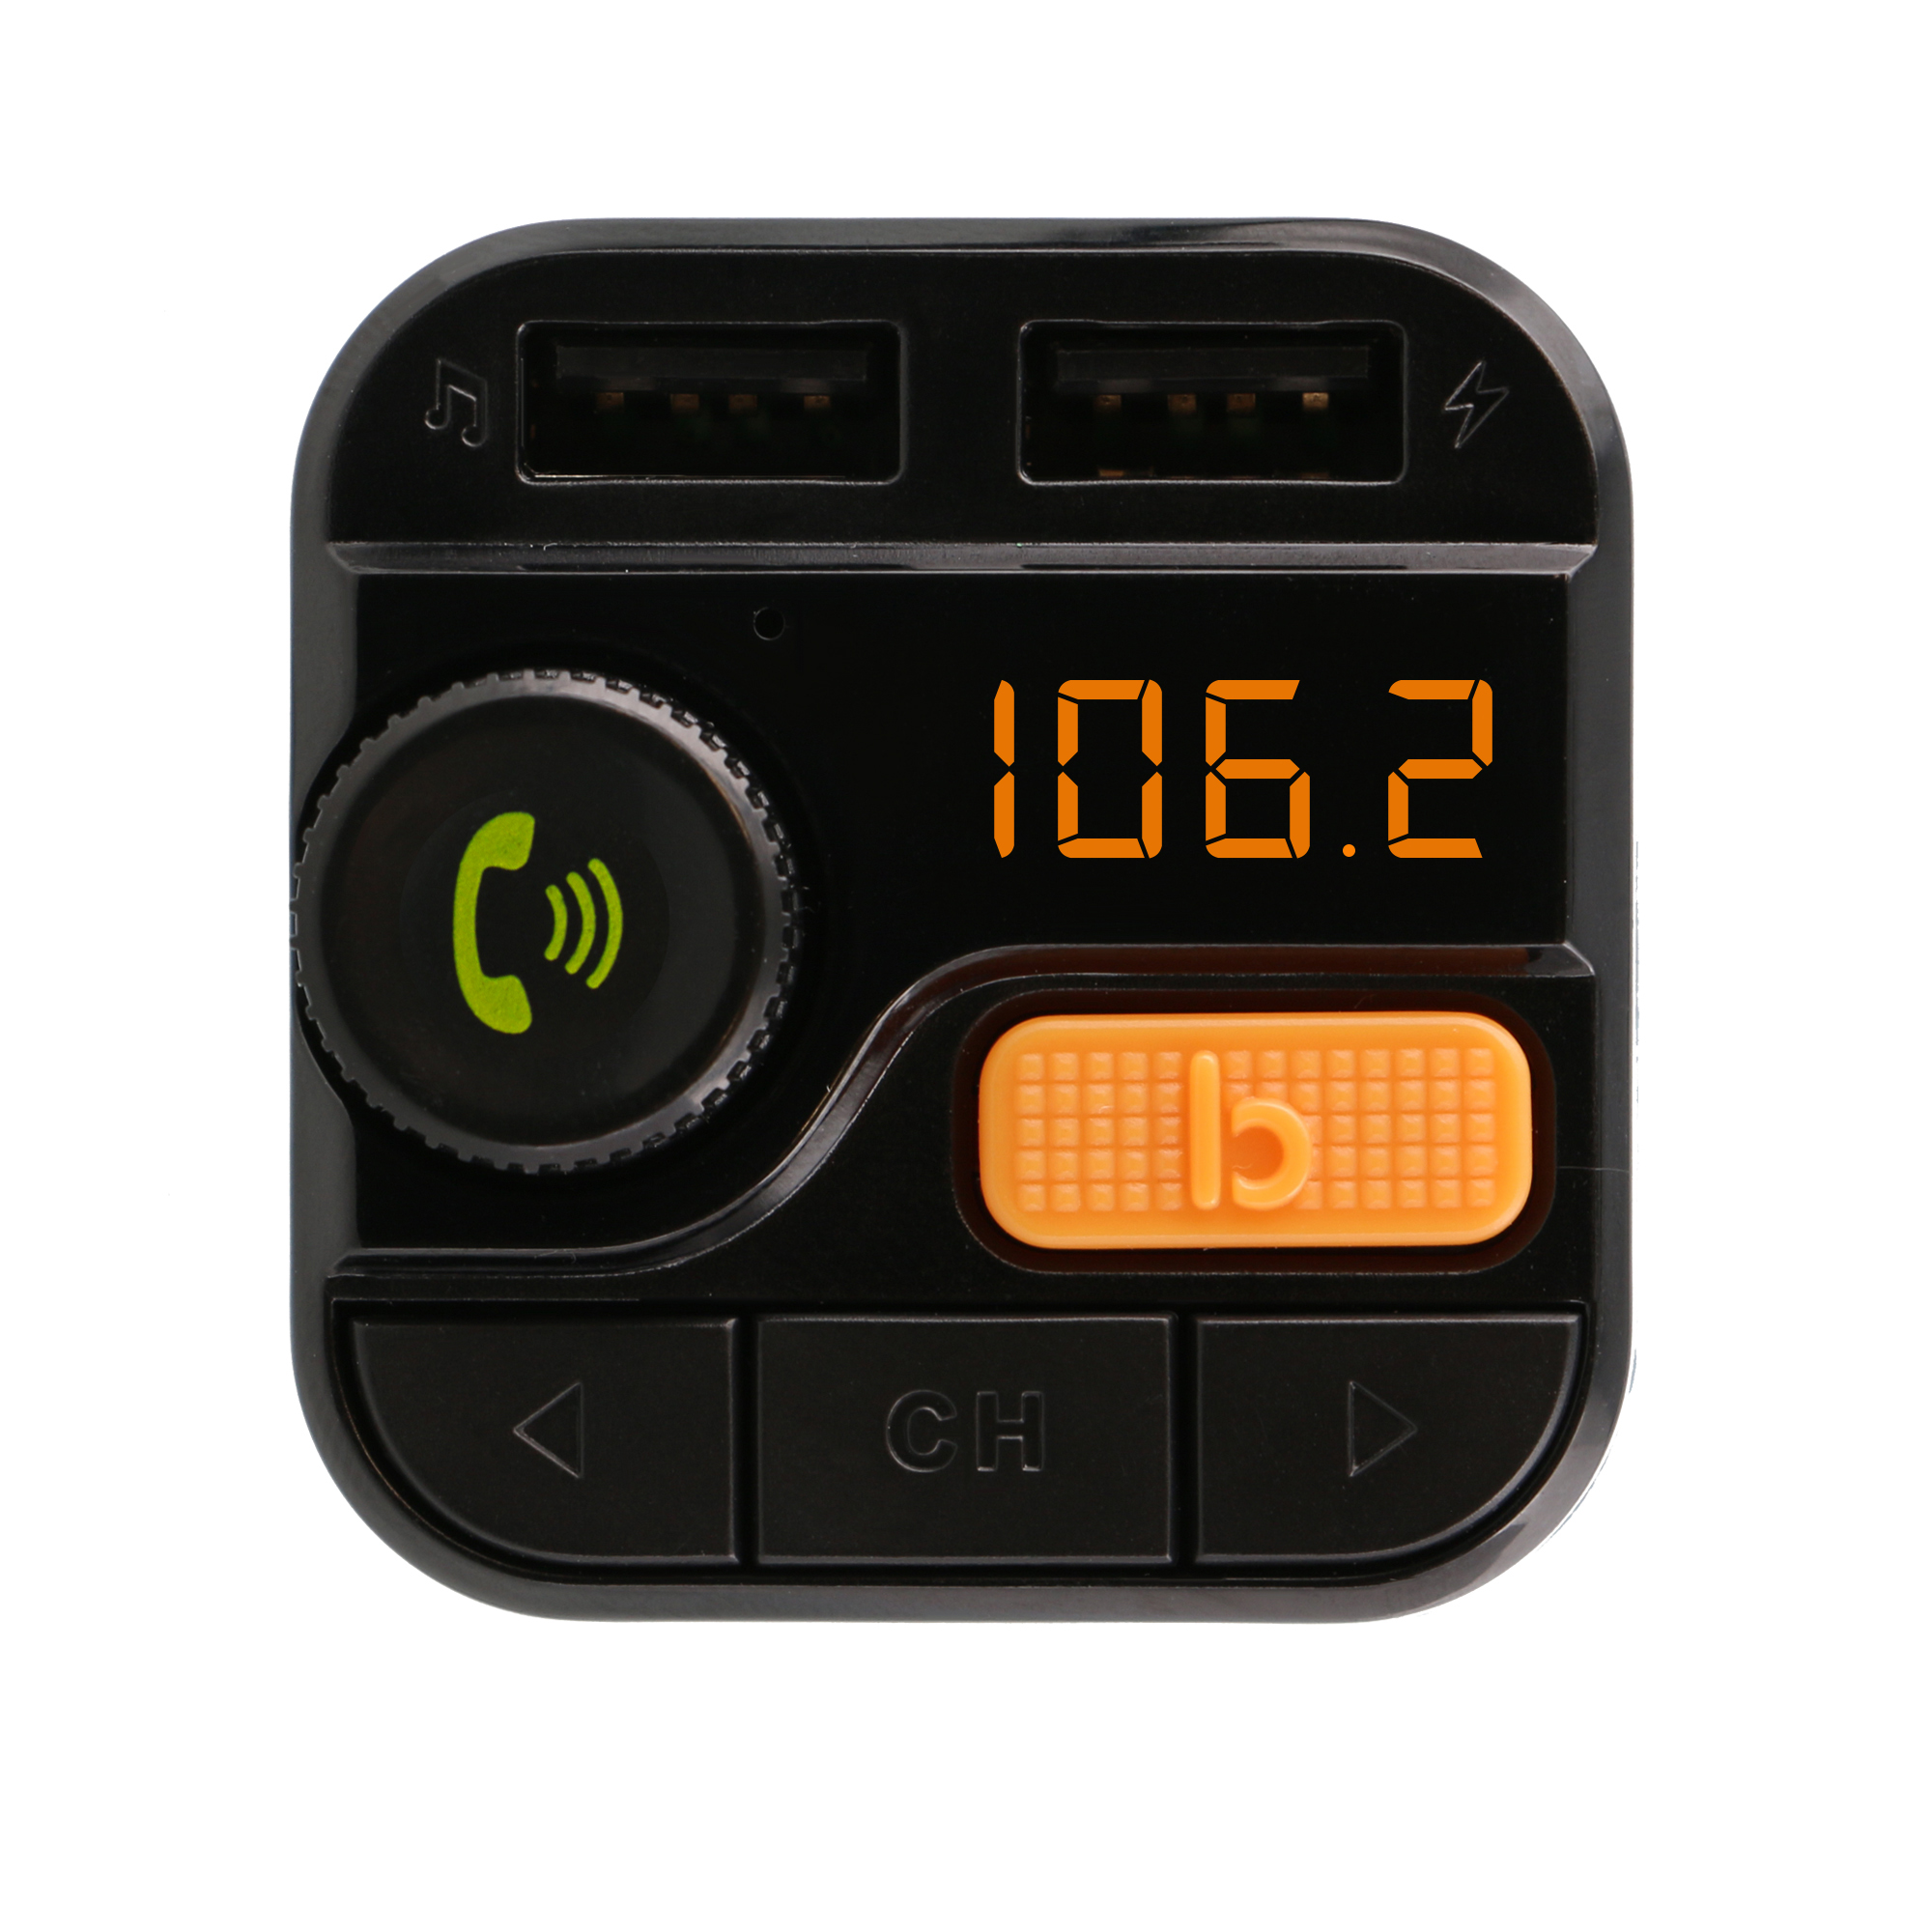 What is the difference between Bluetooth and FM transmitter on